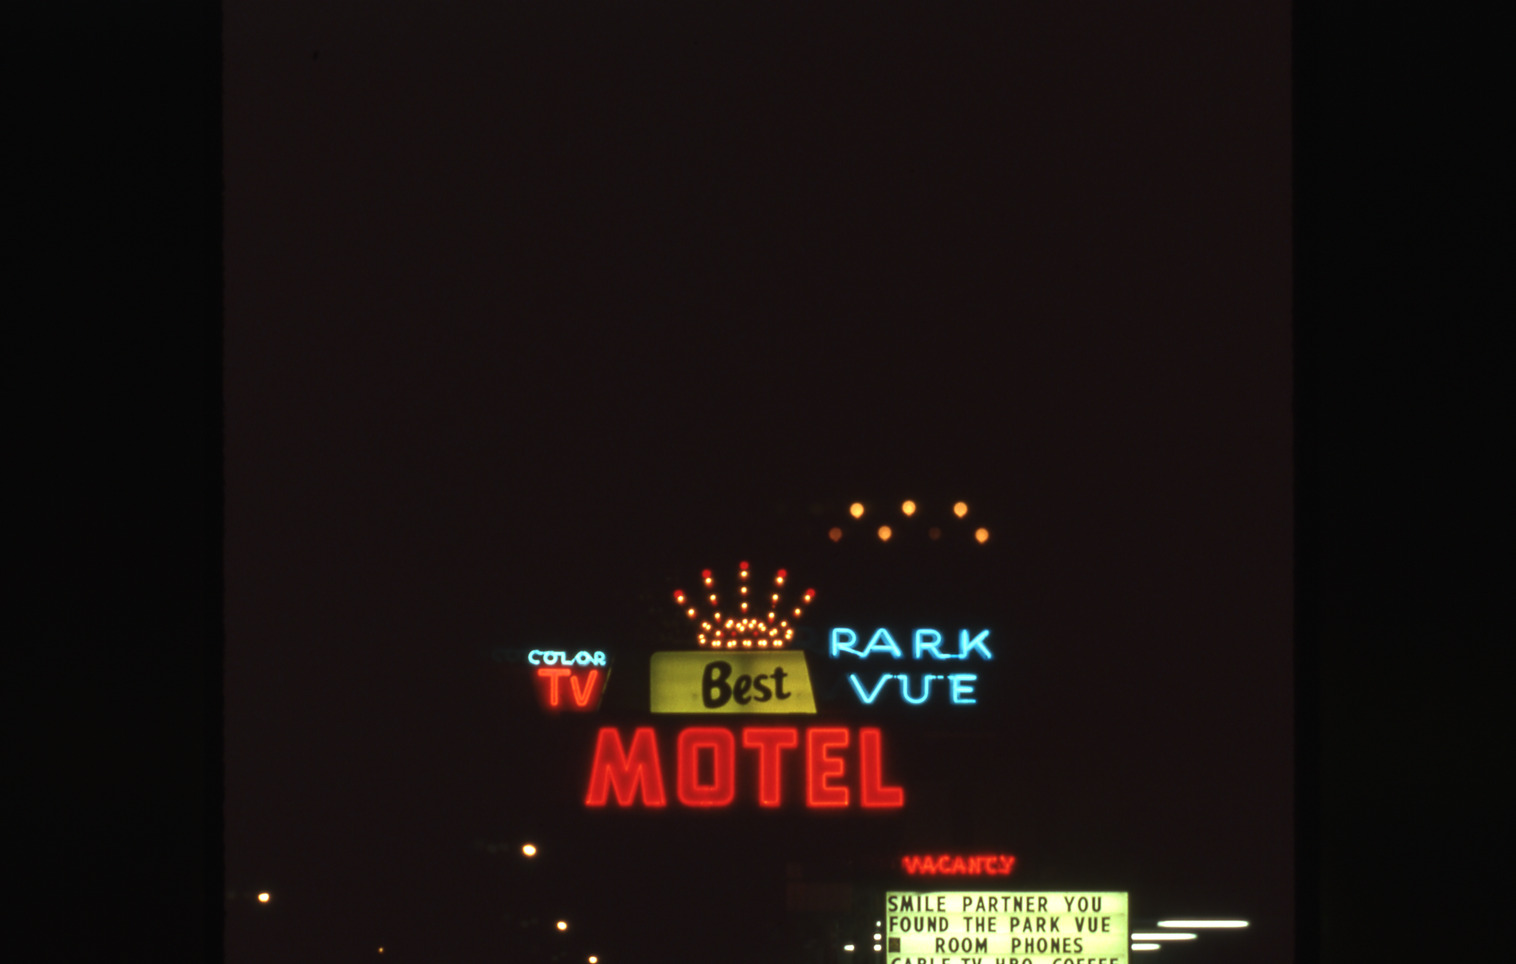 Park Vue Motel flag mounted pylon and marquee sign, Ely, Nevada: photographic print